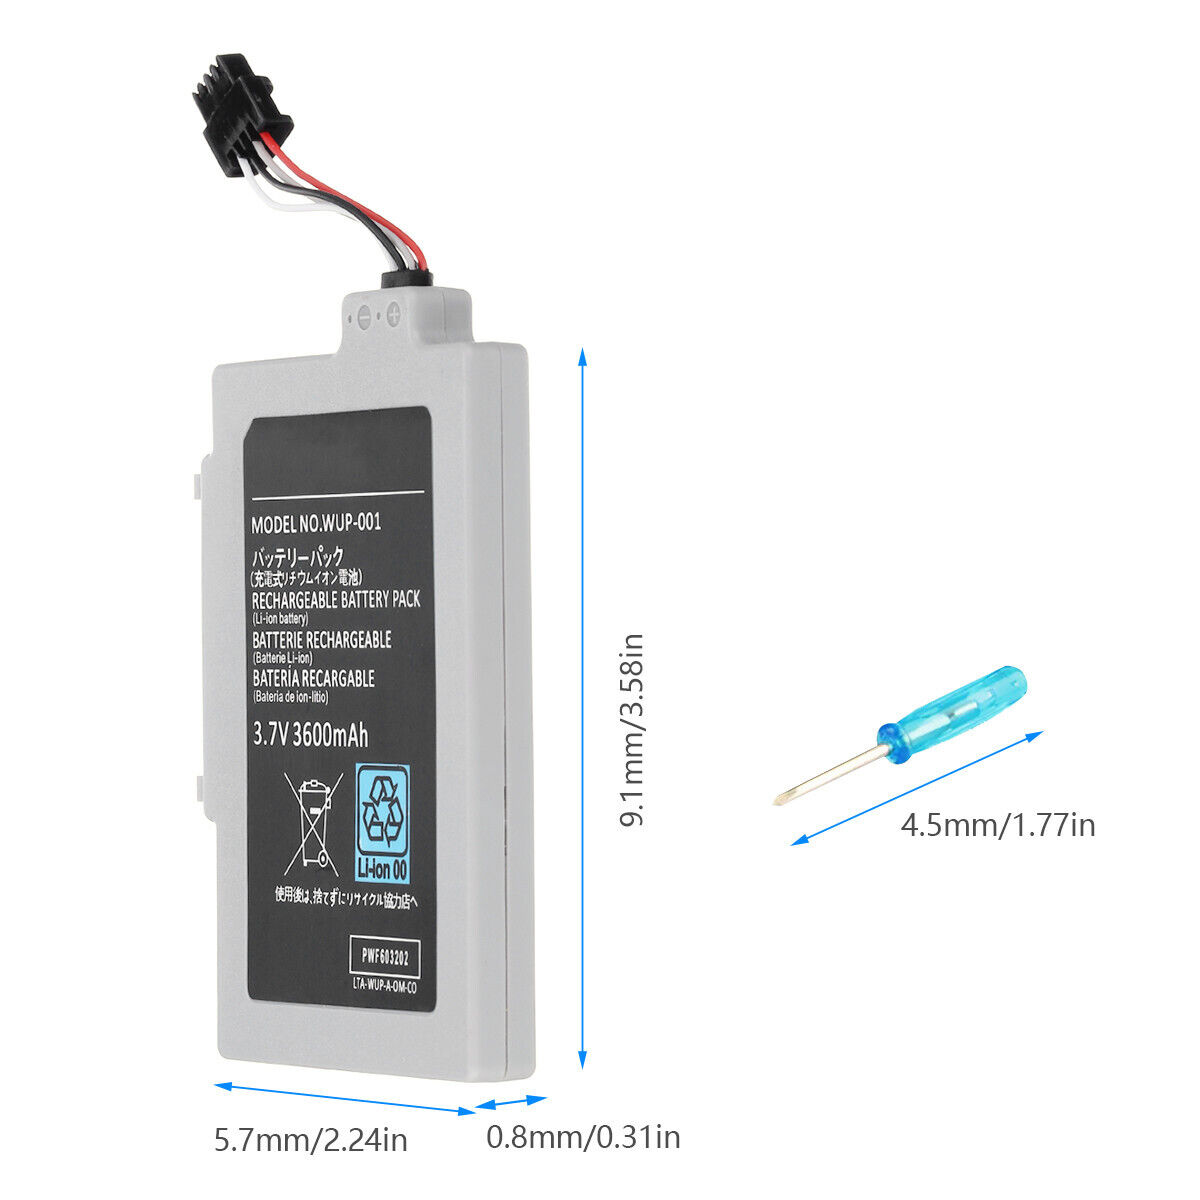 Rechargeable Extended Battery Pack For Nintendo Wii U Gamepad 3600mAh 3.7V OEM Unbranded - фотография #7